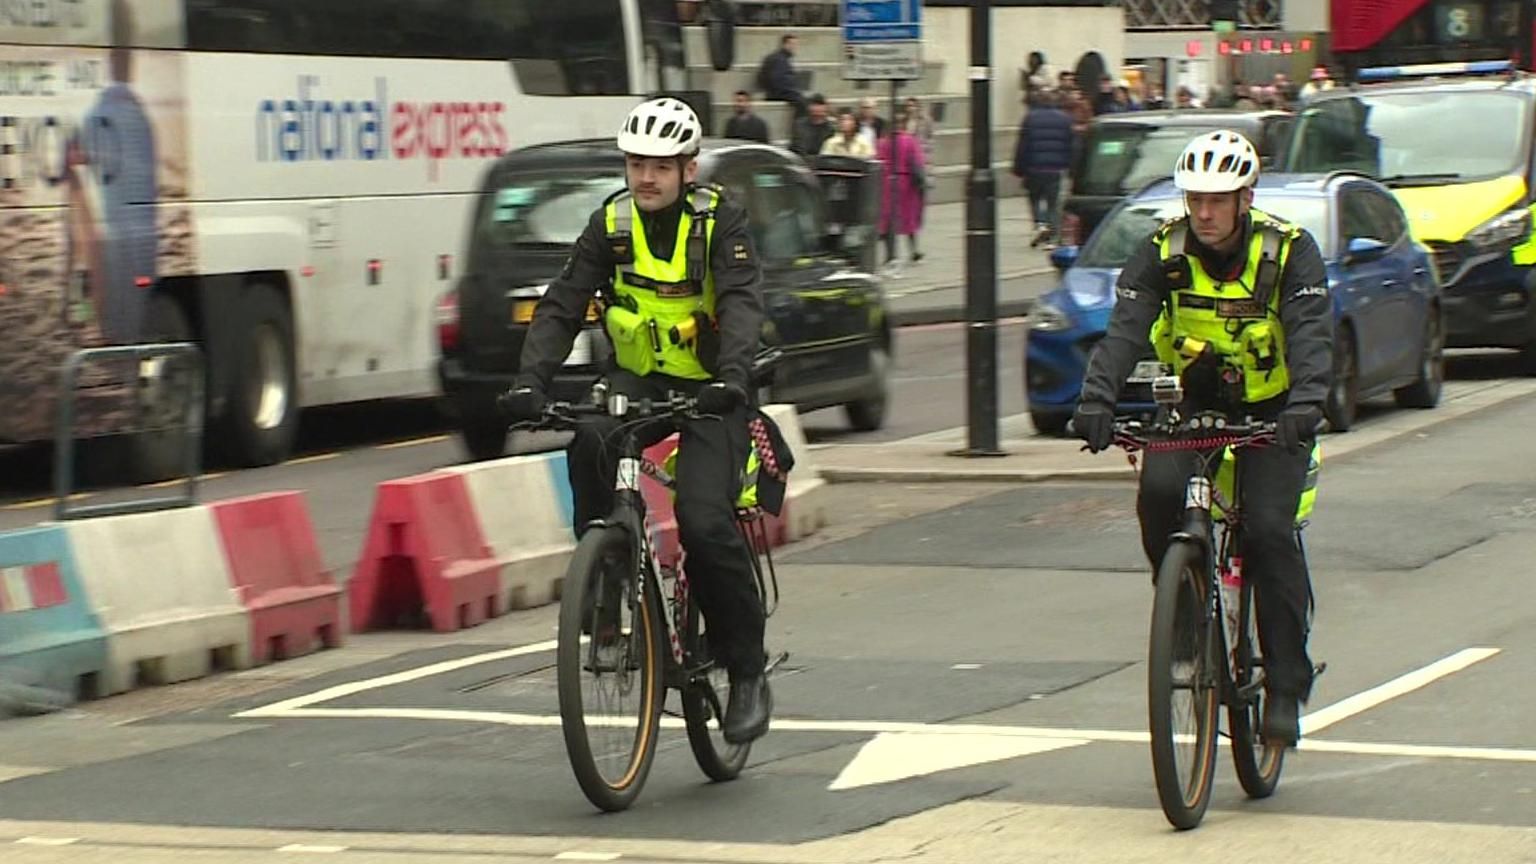 Police officers on bicycles 